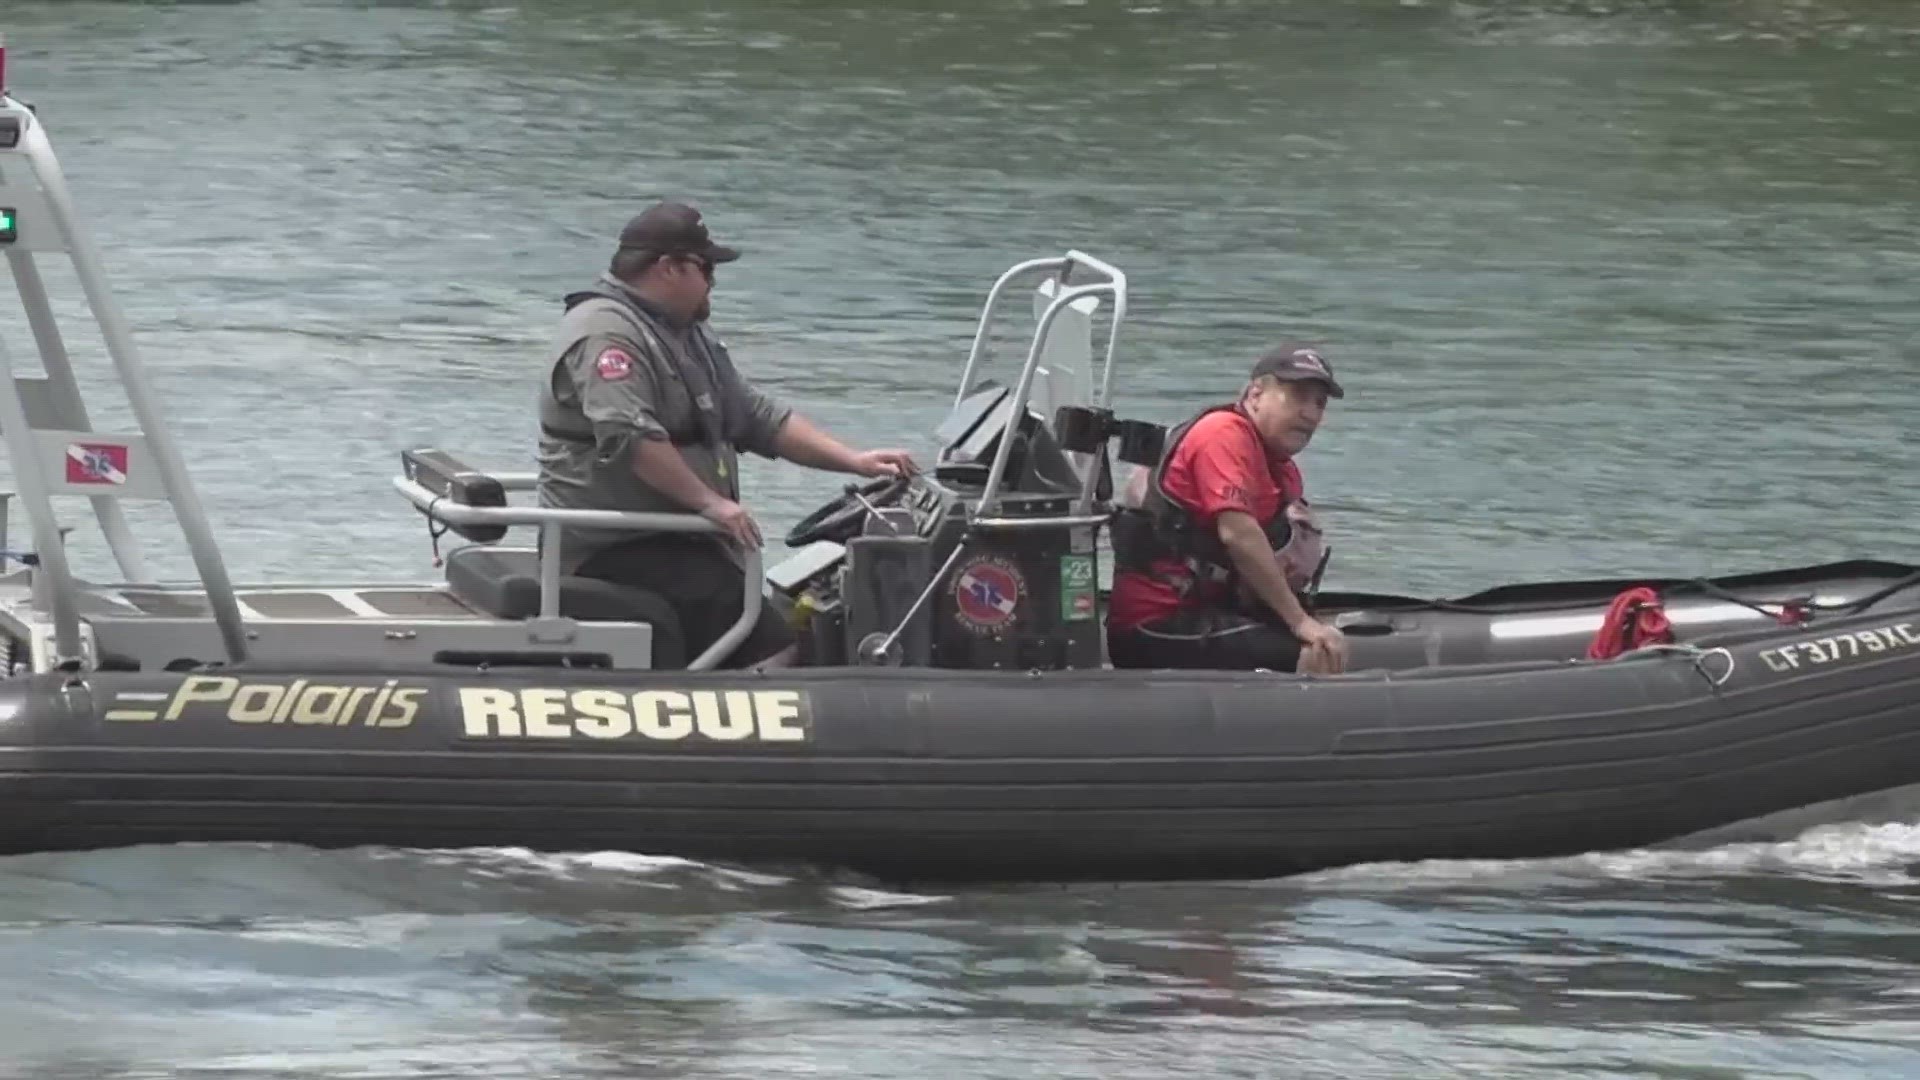 An update on river conditions and a message from the Drowning Accident Rescue Team in Sacramento County.